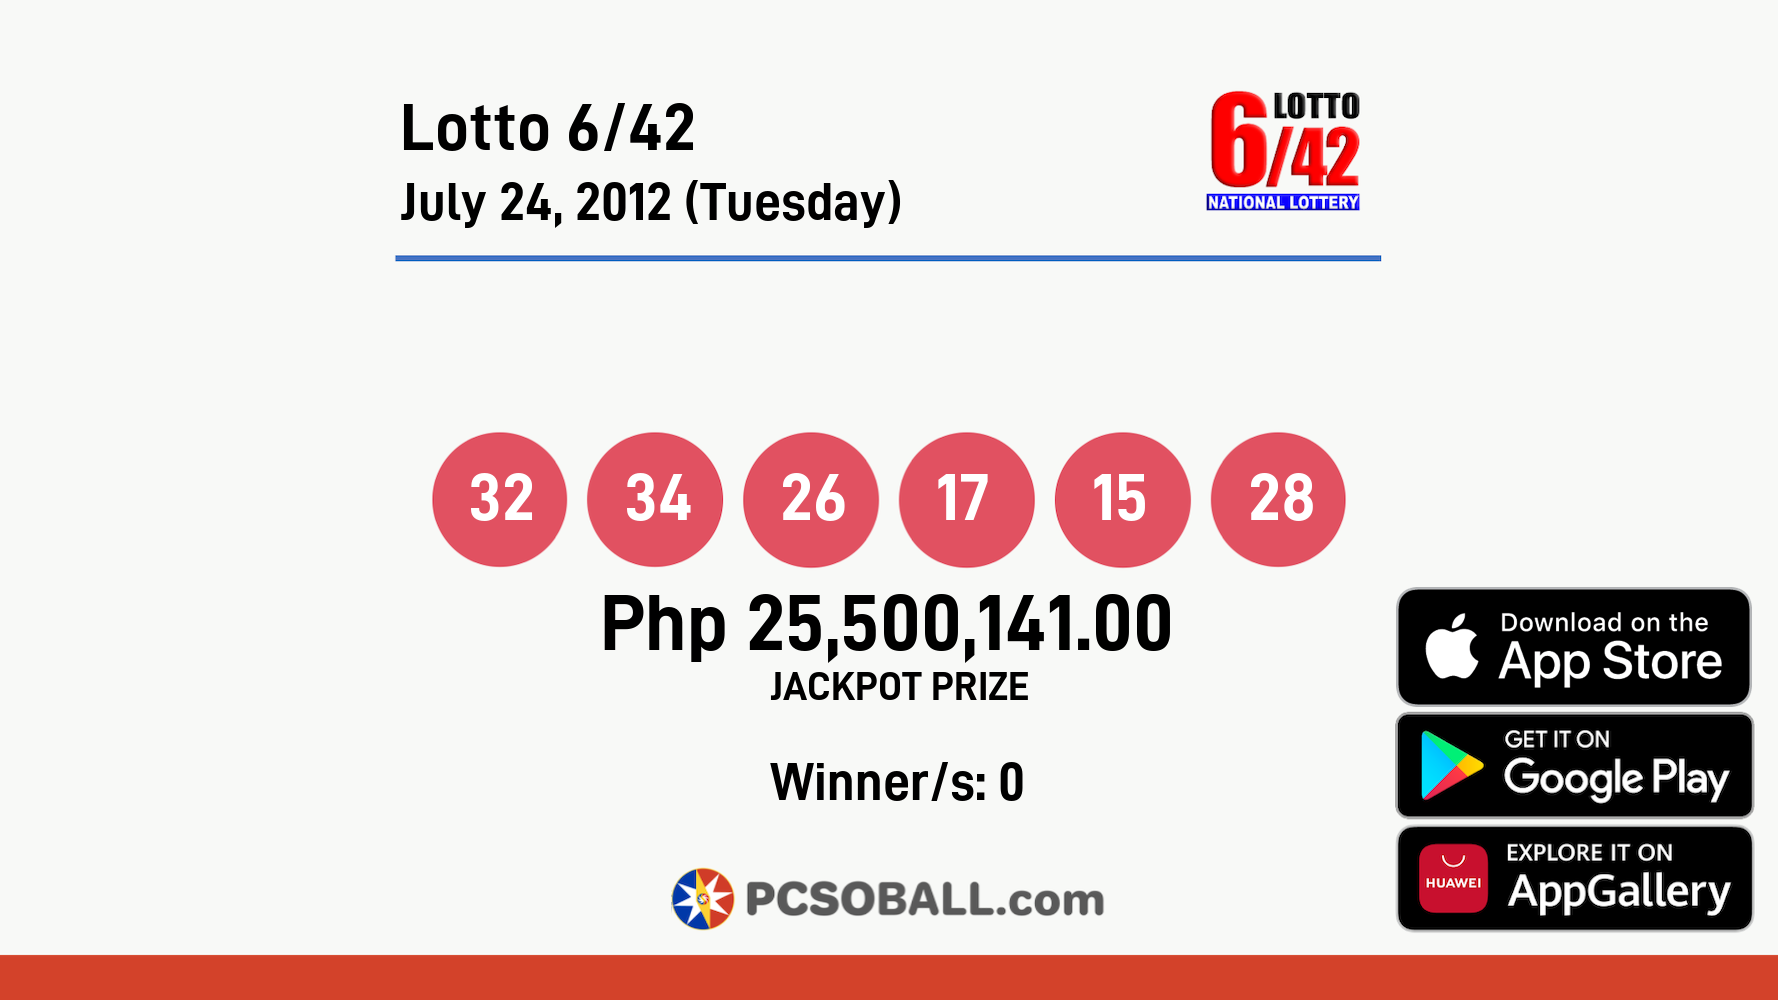 Lotto 6/42 July 24, 2012 (Tuesday) Result